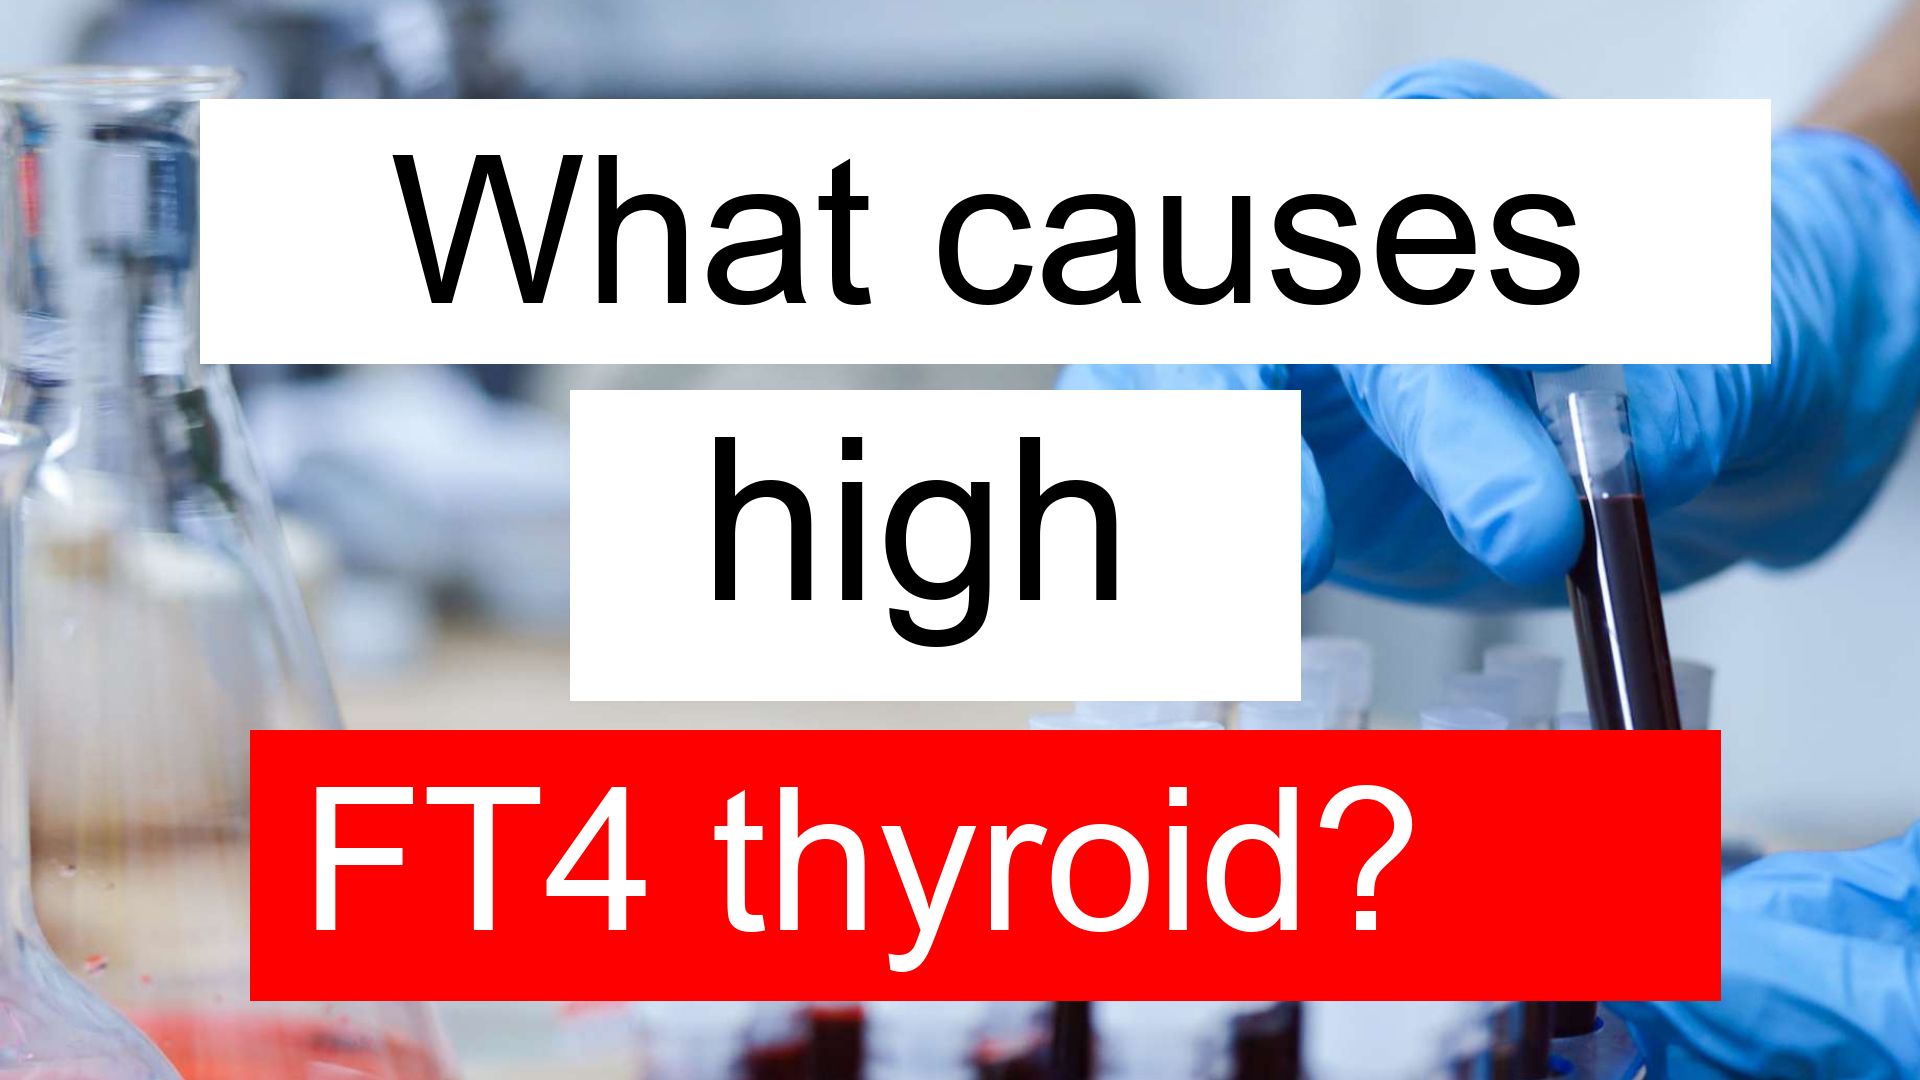 What causes high FT4 thyroid and low FT3 thyroid?